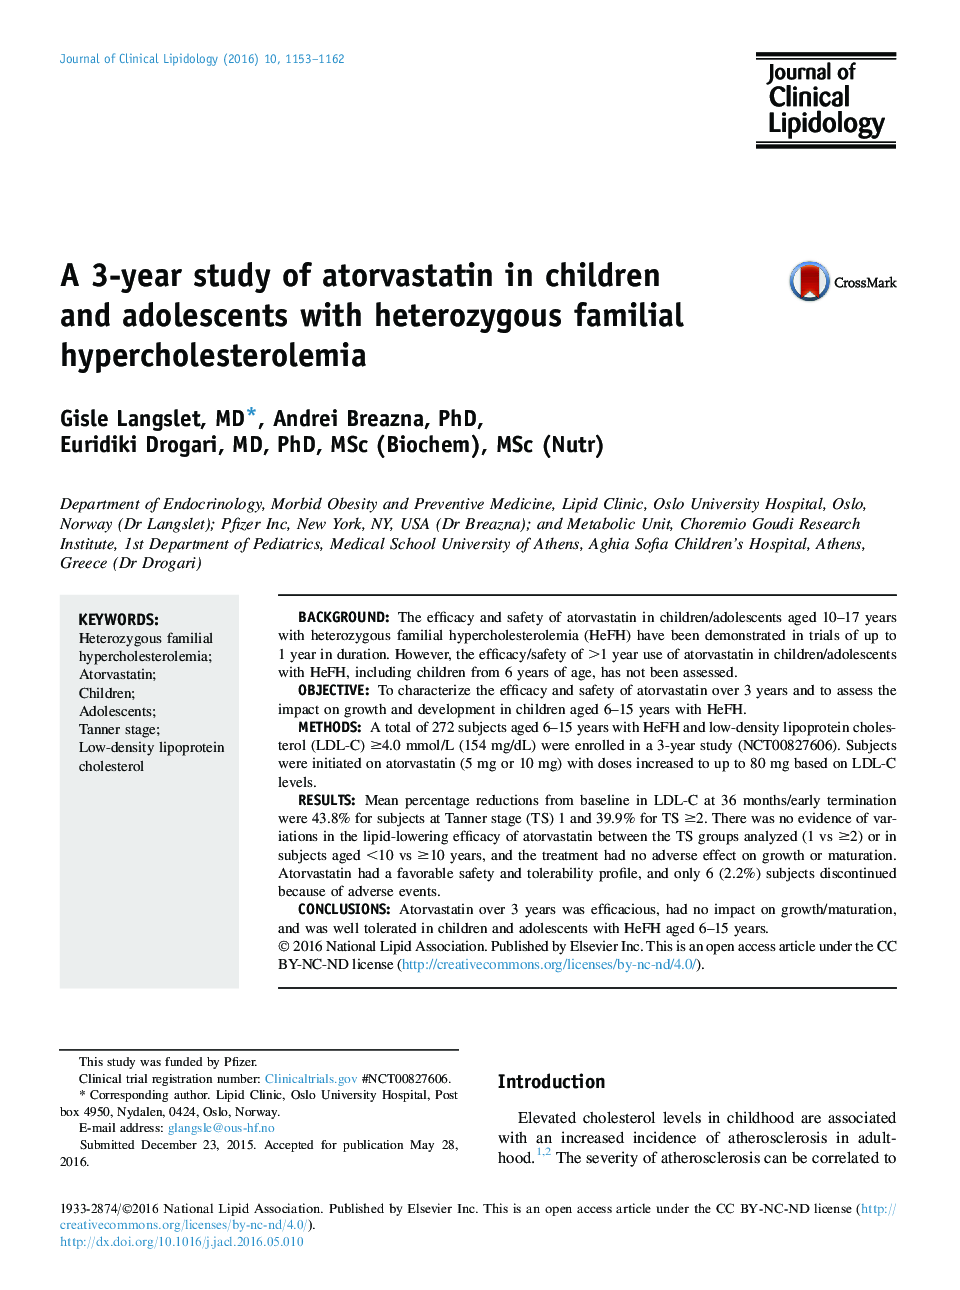 A 3-year study of atorvastatin in children and adolescents with heterozygous familial hypercholesterolemia